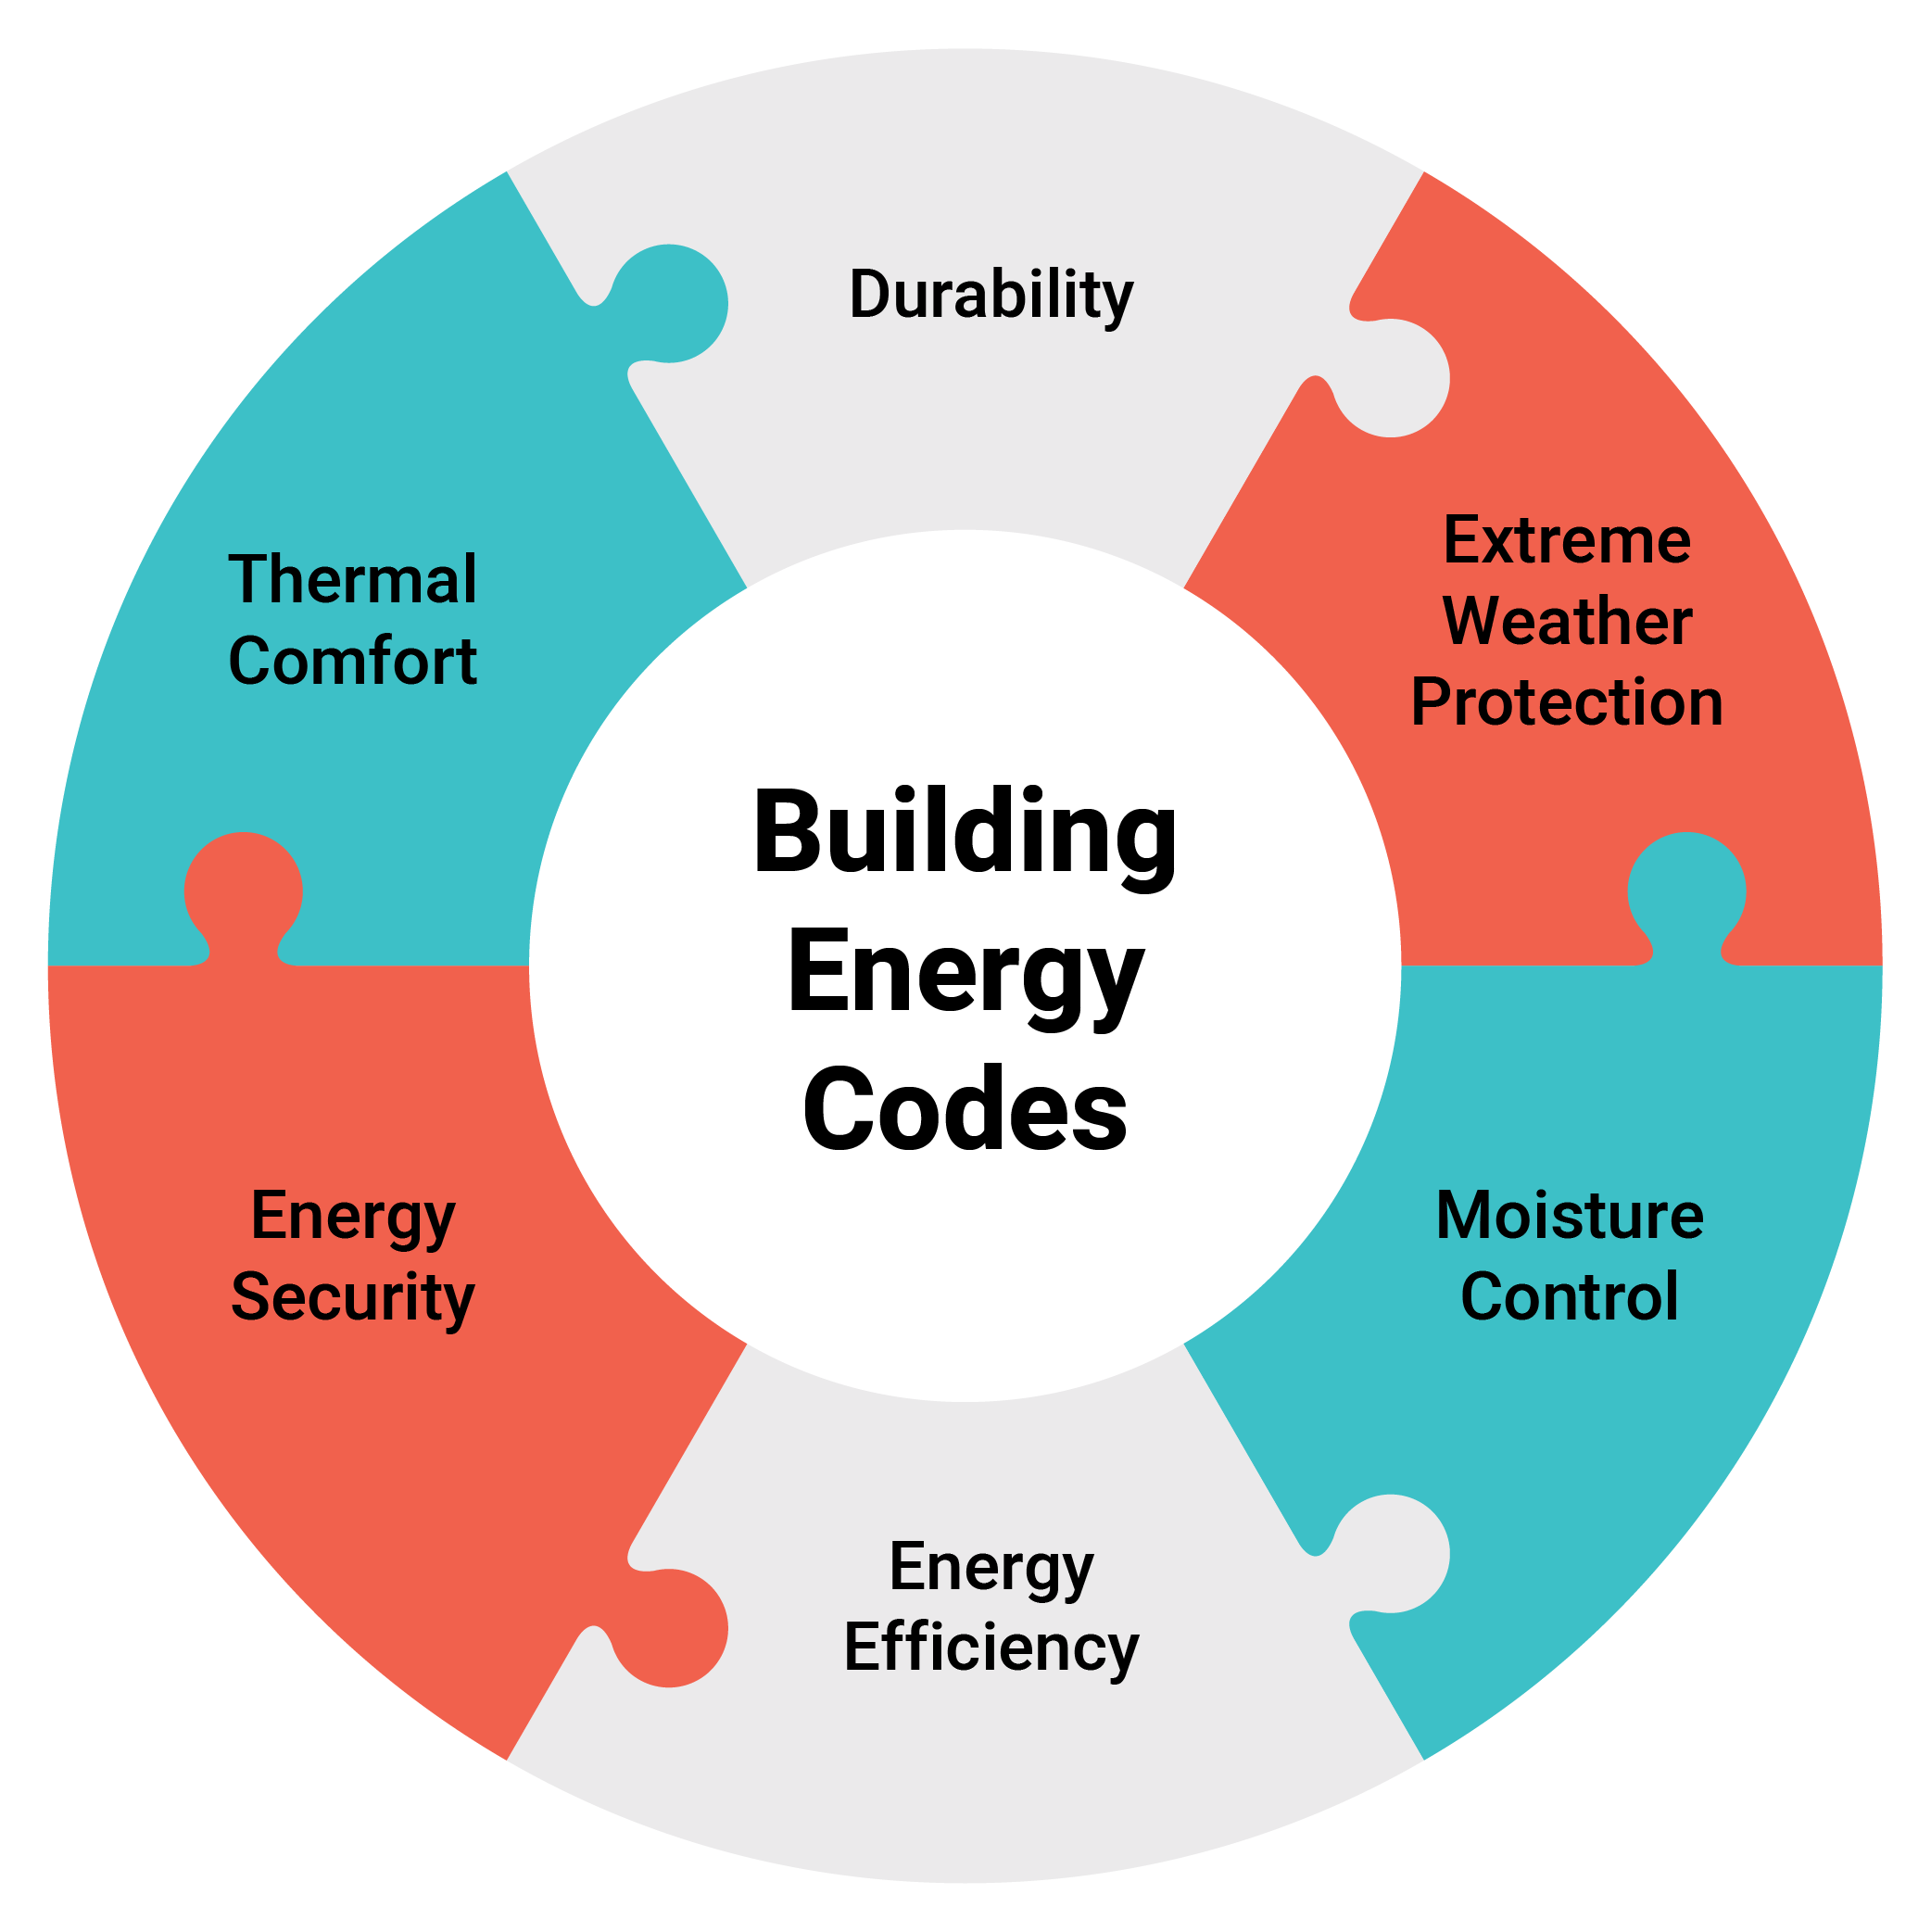 What are building codes? Codes4Climate